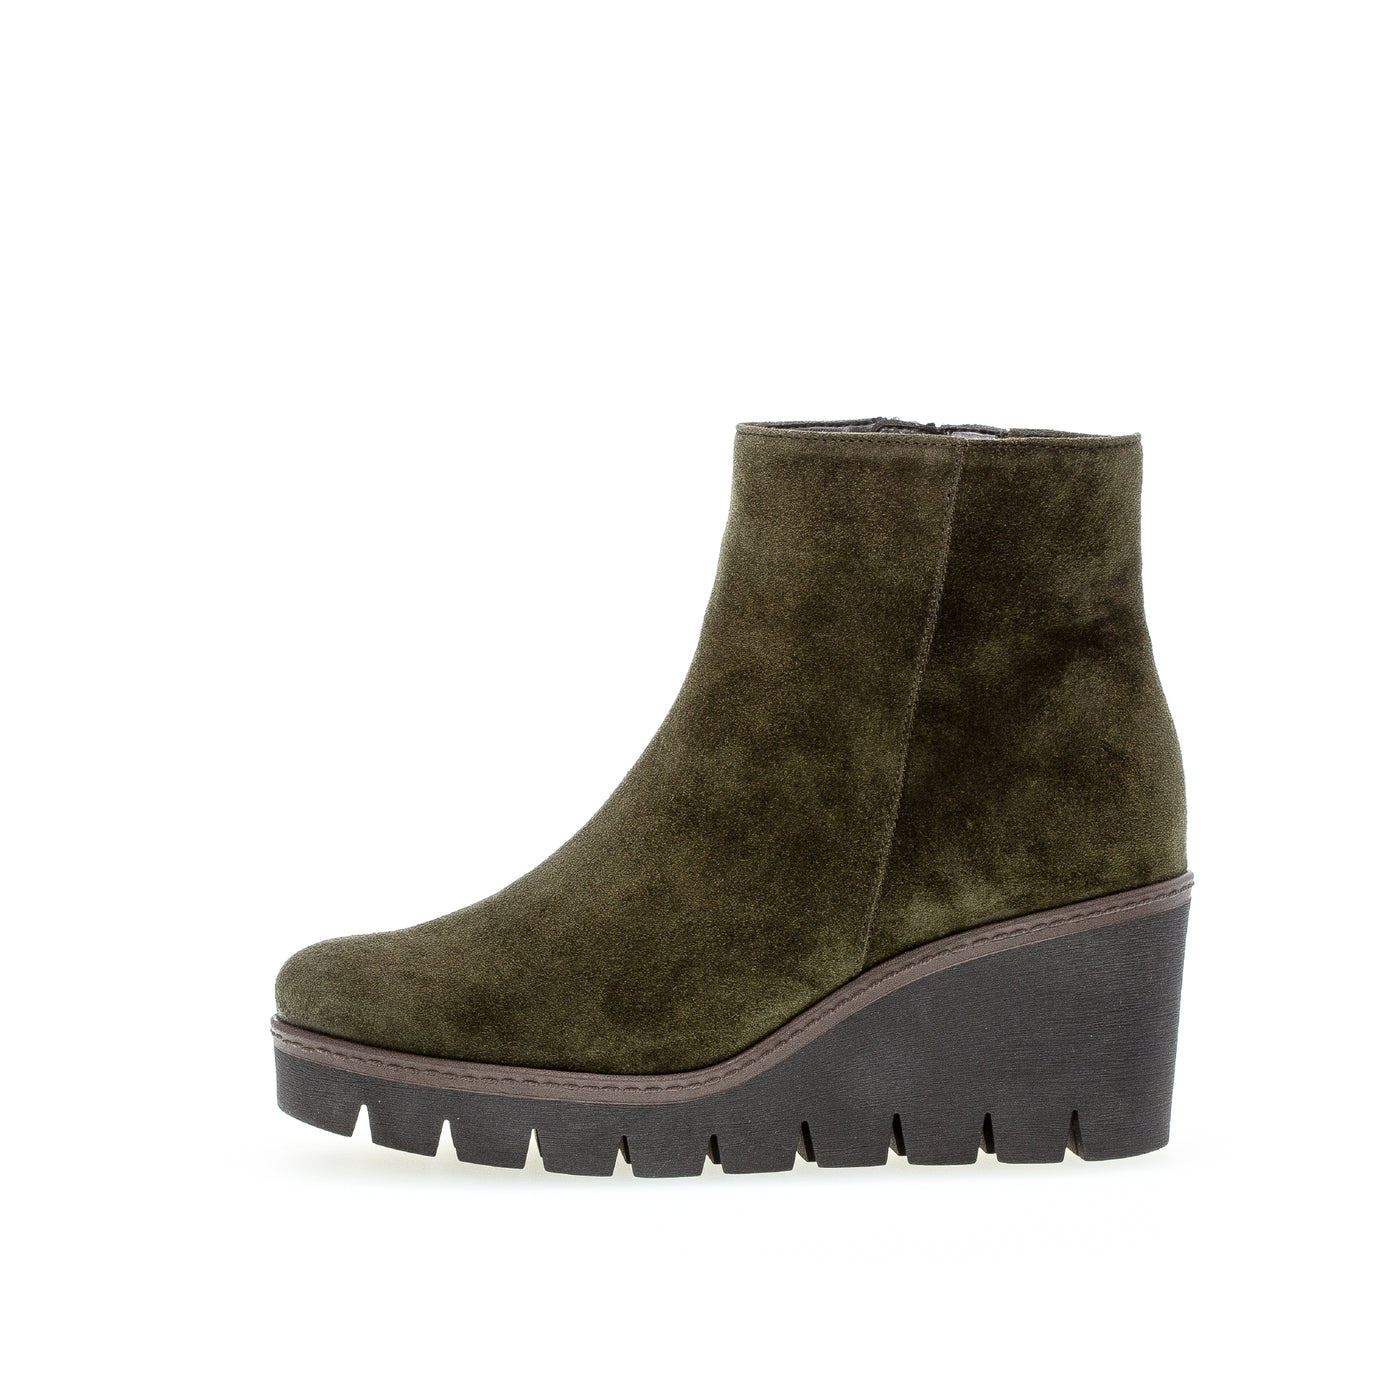 GABOR - 54.780.11 MEDIUM WEDGE ANKLE BOOT - GREEN SUEDE